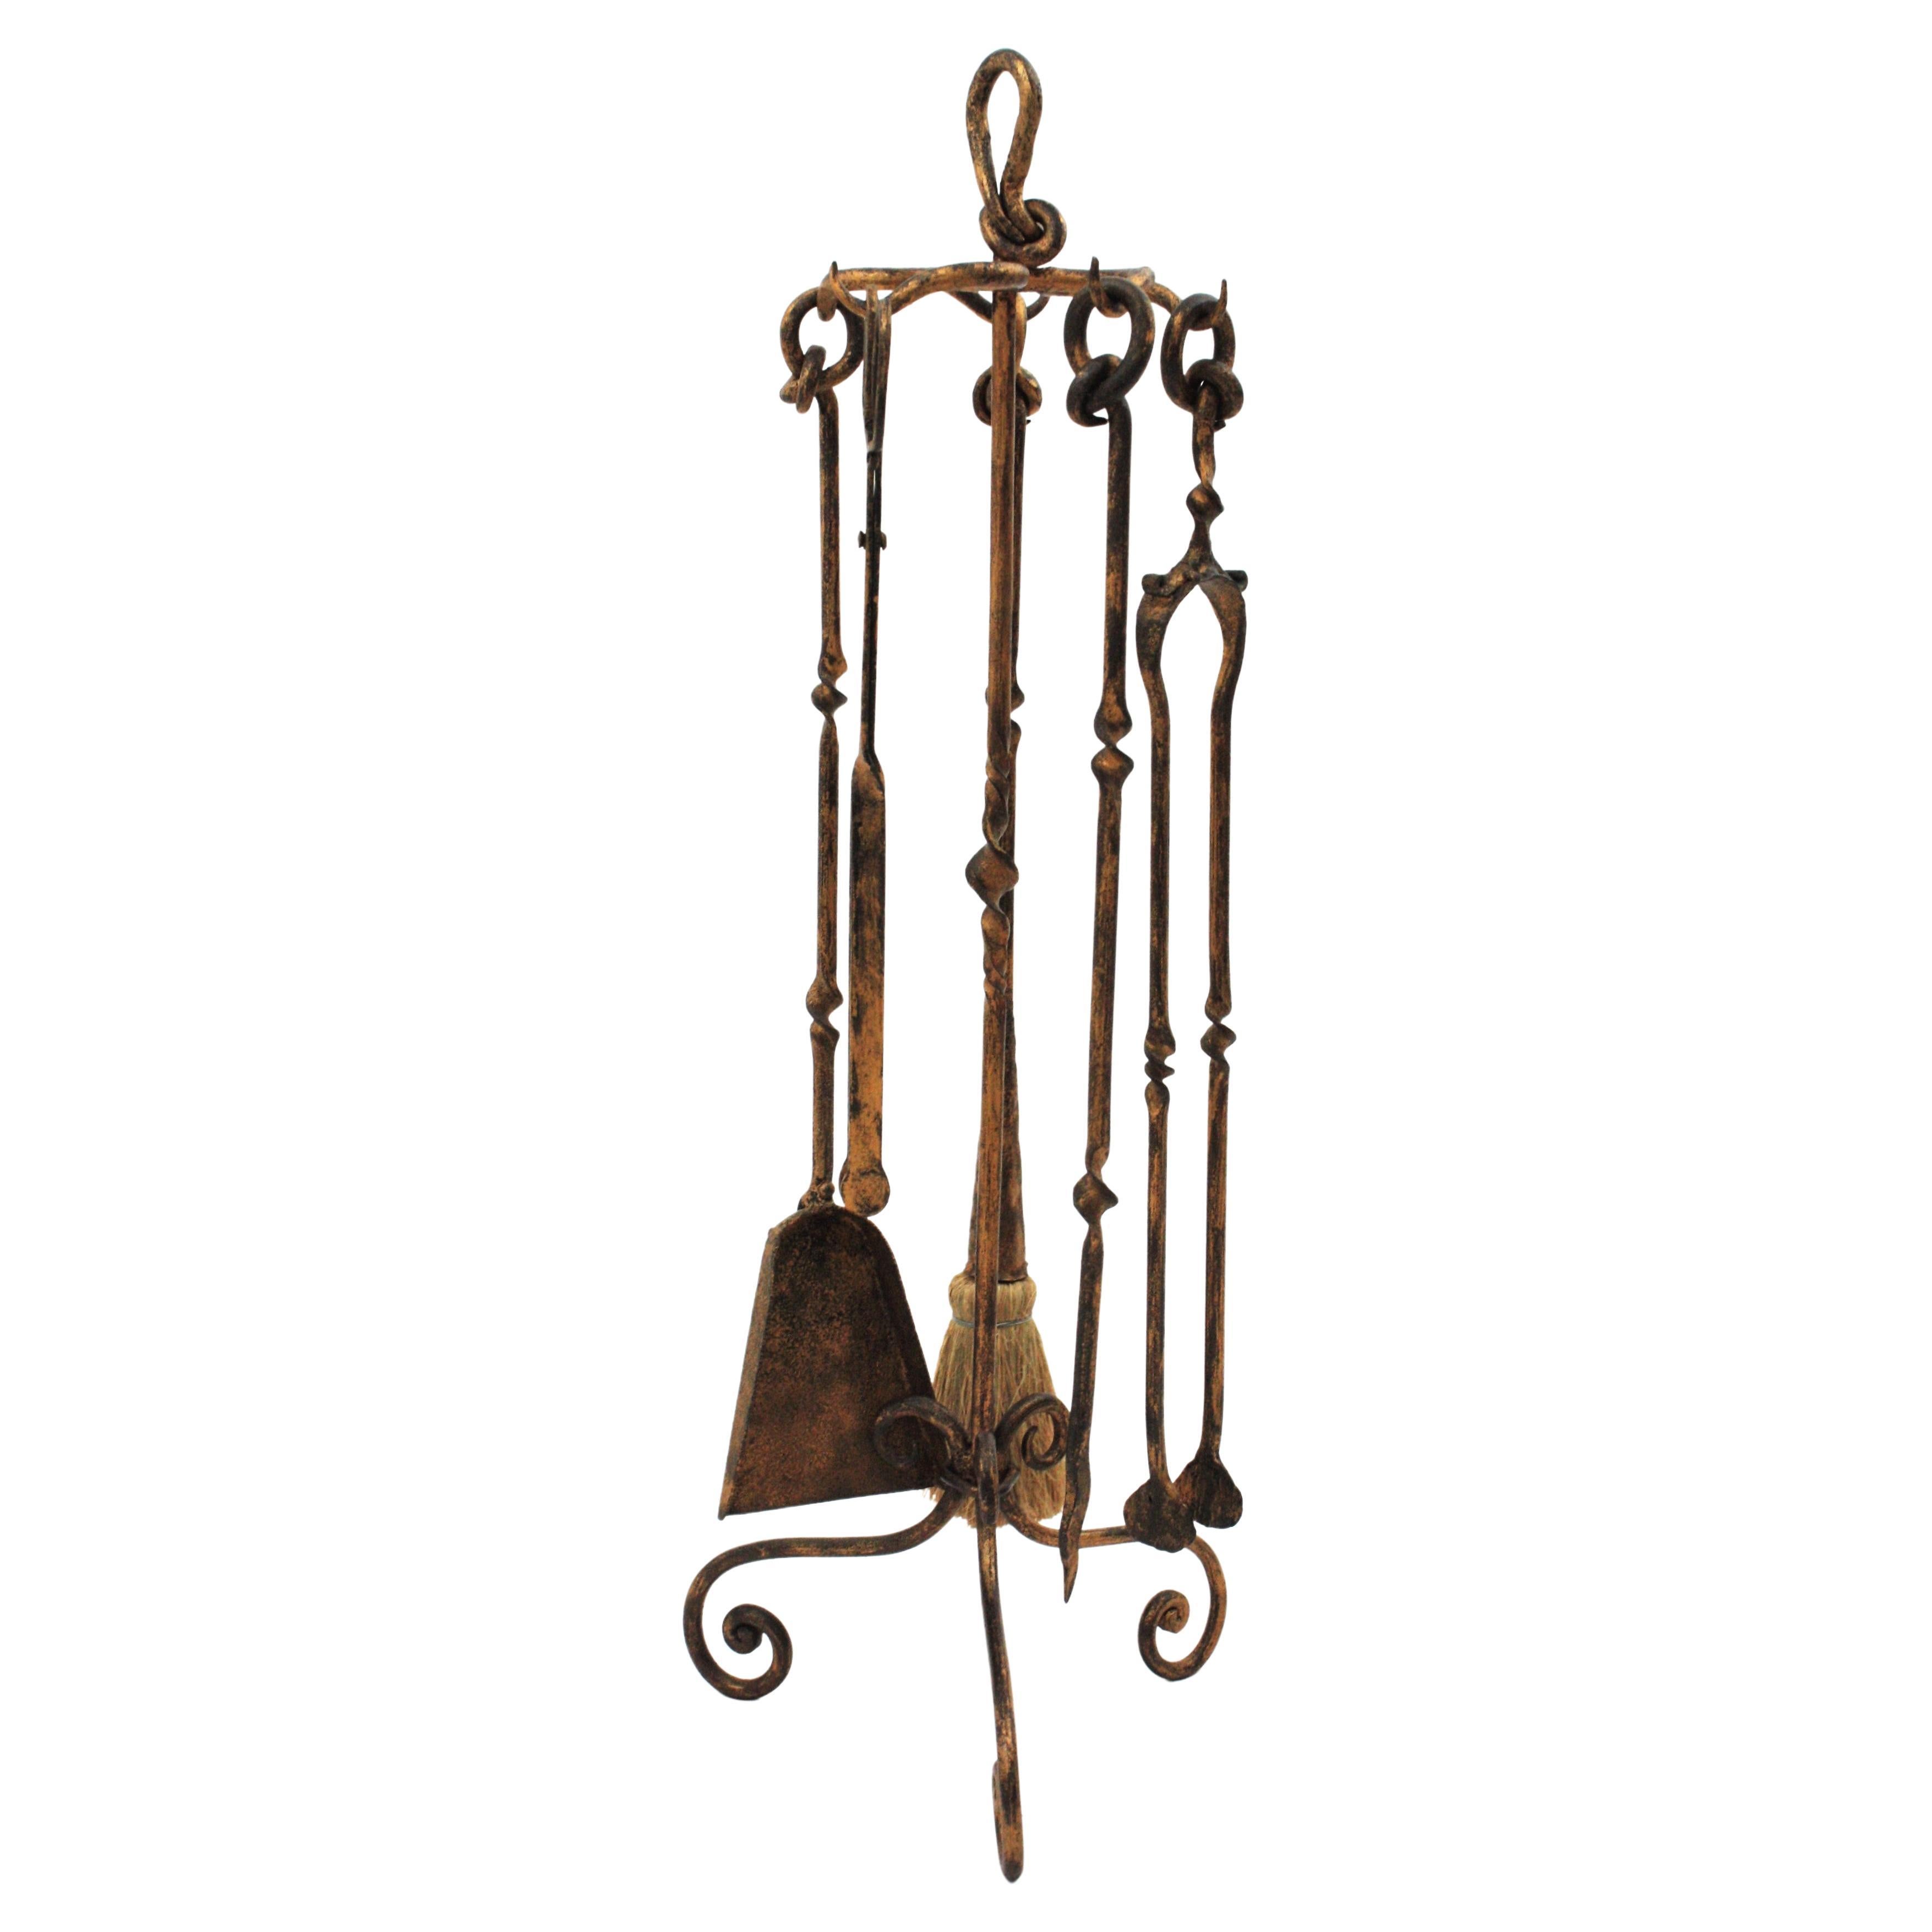 Spanish Brutalist Fireplace Tool Set Stand, Gilt Wrought Iron and Knot Design For Sale